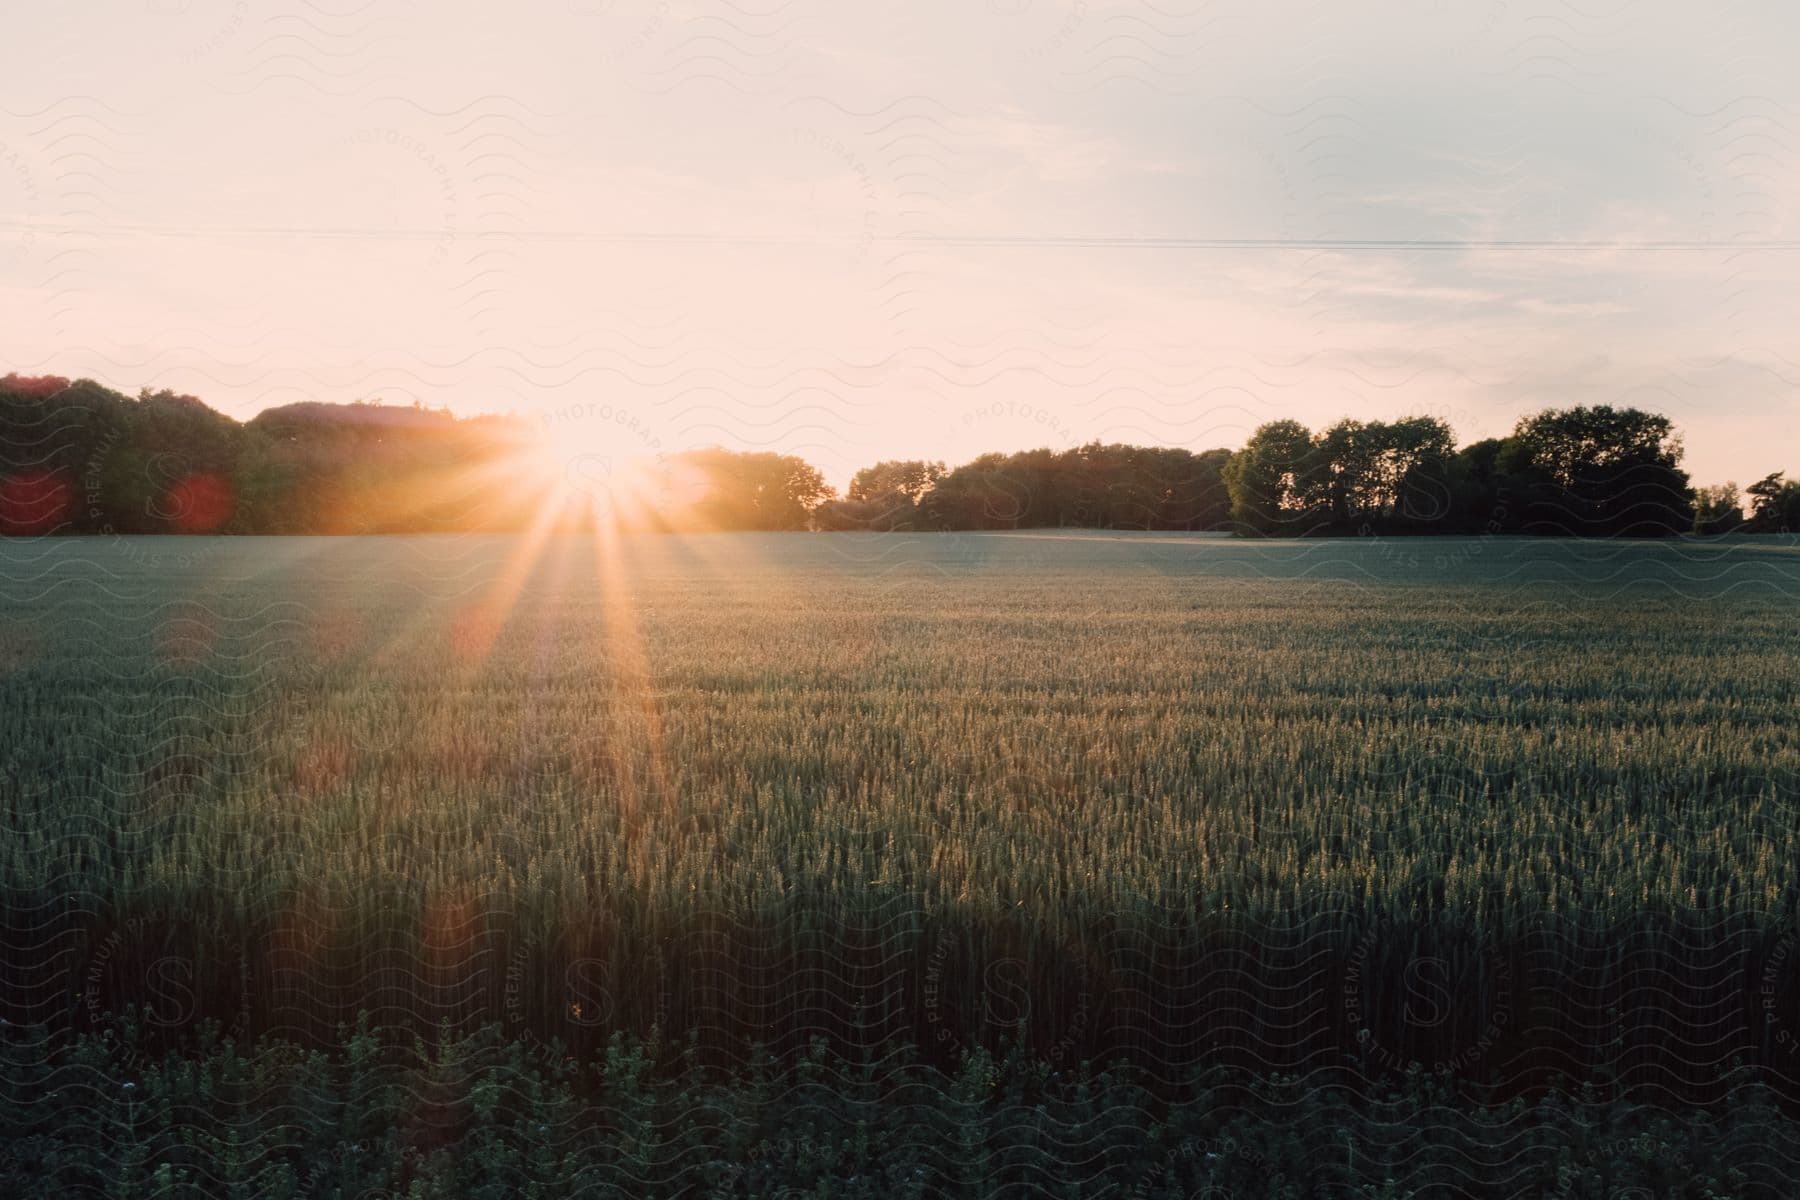 Stock photo of a field of crops at sunset